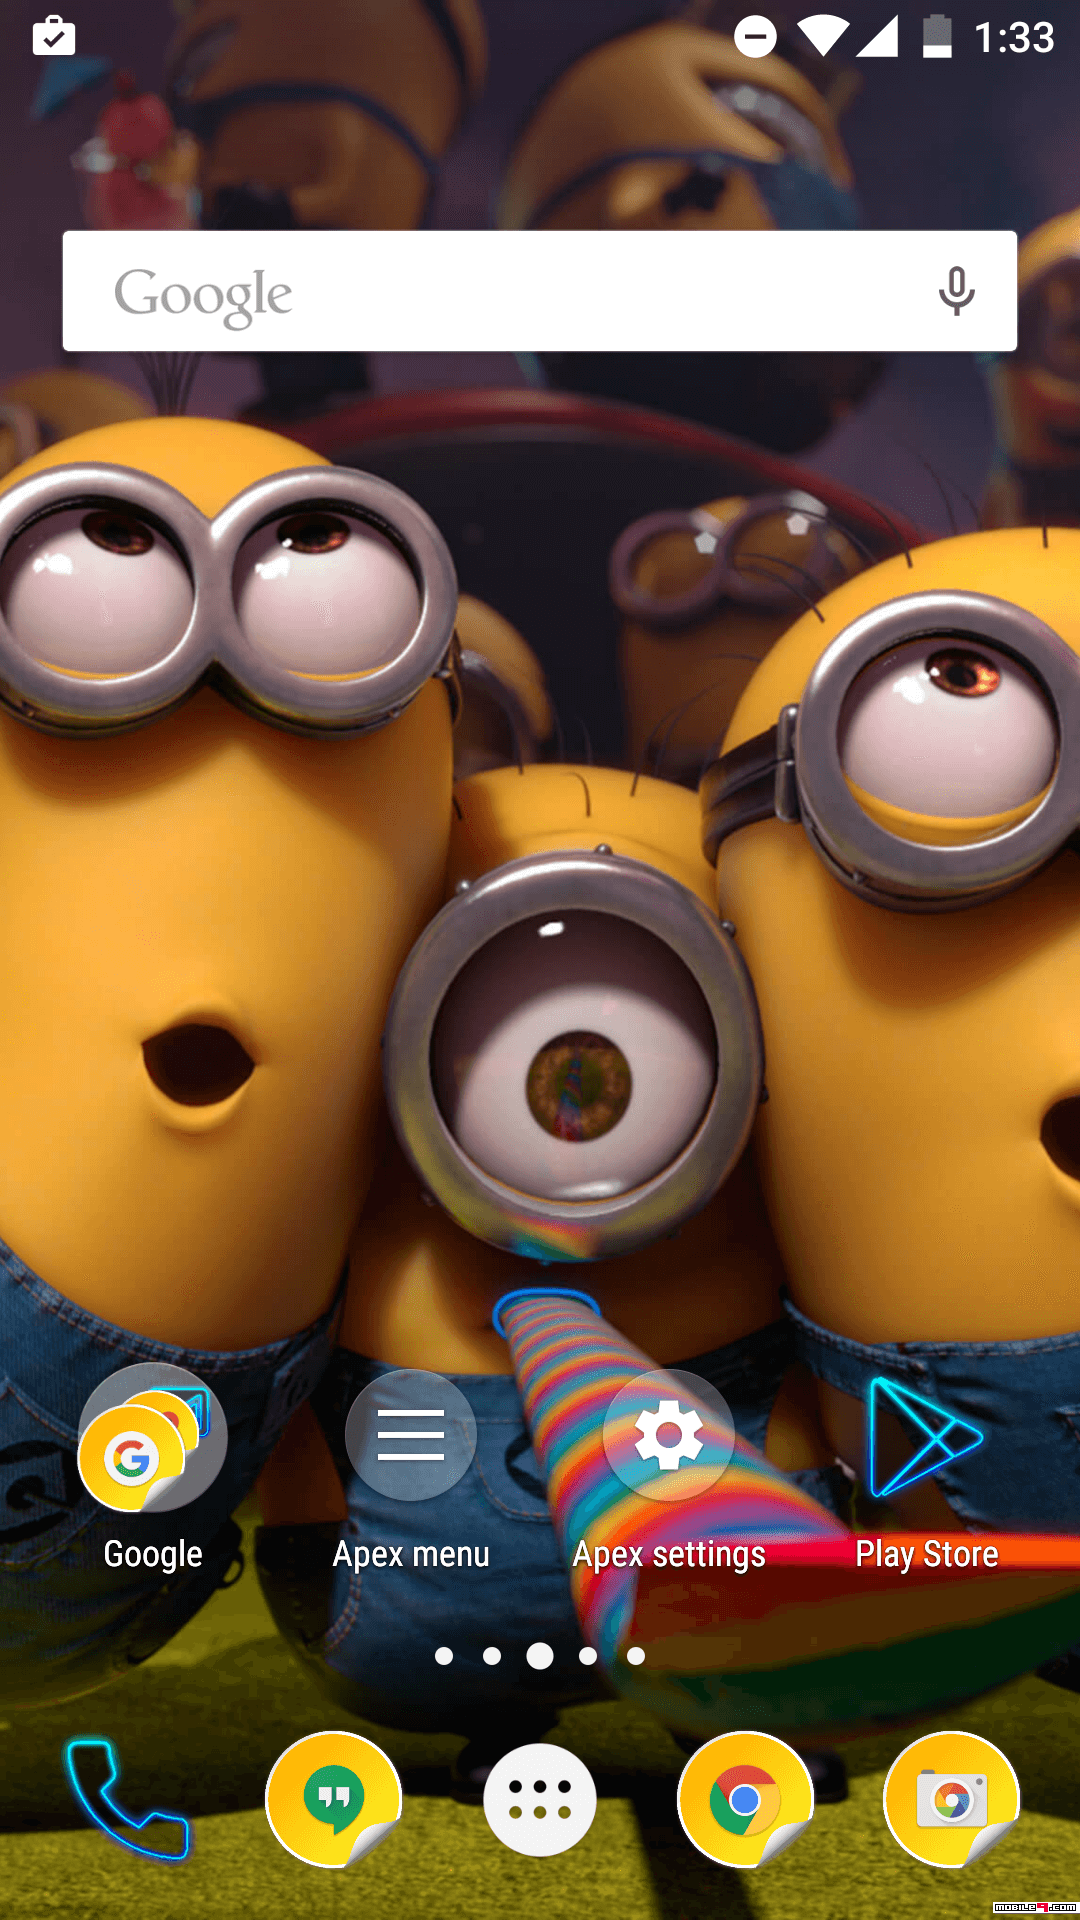 Download Minions theme android 2016 Apex Launcher Themes - 4578399 -  download free gru despicable minion themesapk android latest minions  cartoon | mobile9